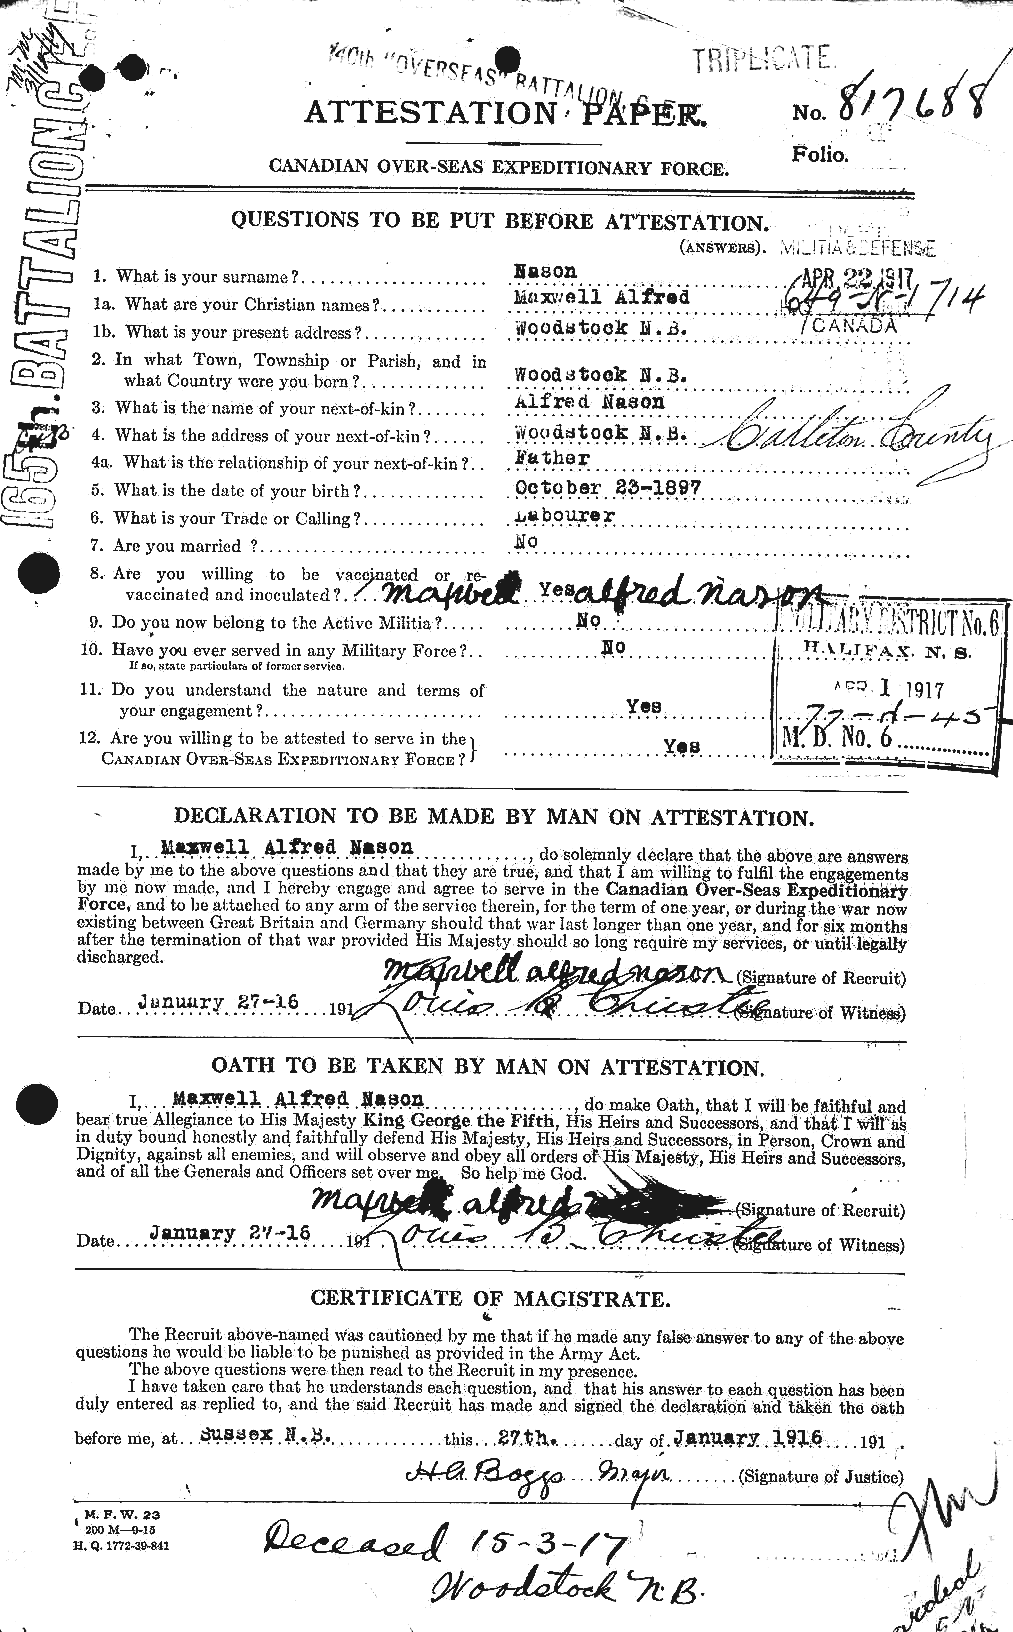 Personnel Records of the First World War - CEF 549123a